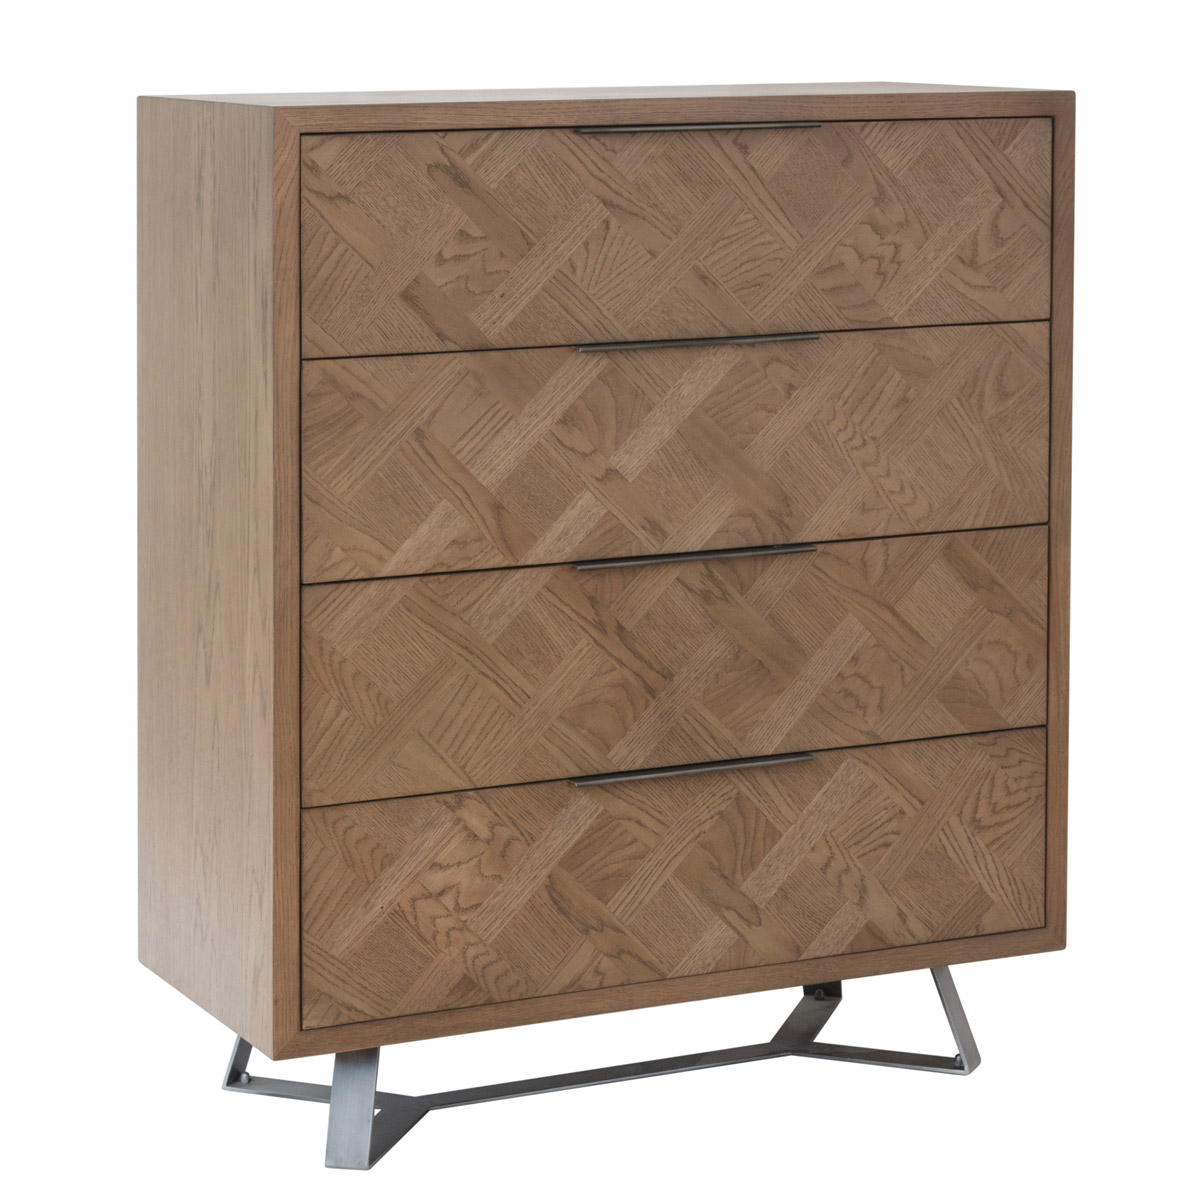 Rustic Wood 4 Drawer Chest of Drawers - Foxton Range